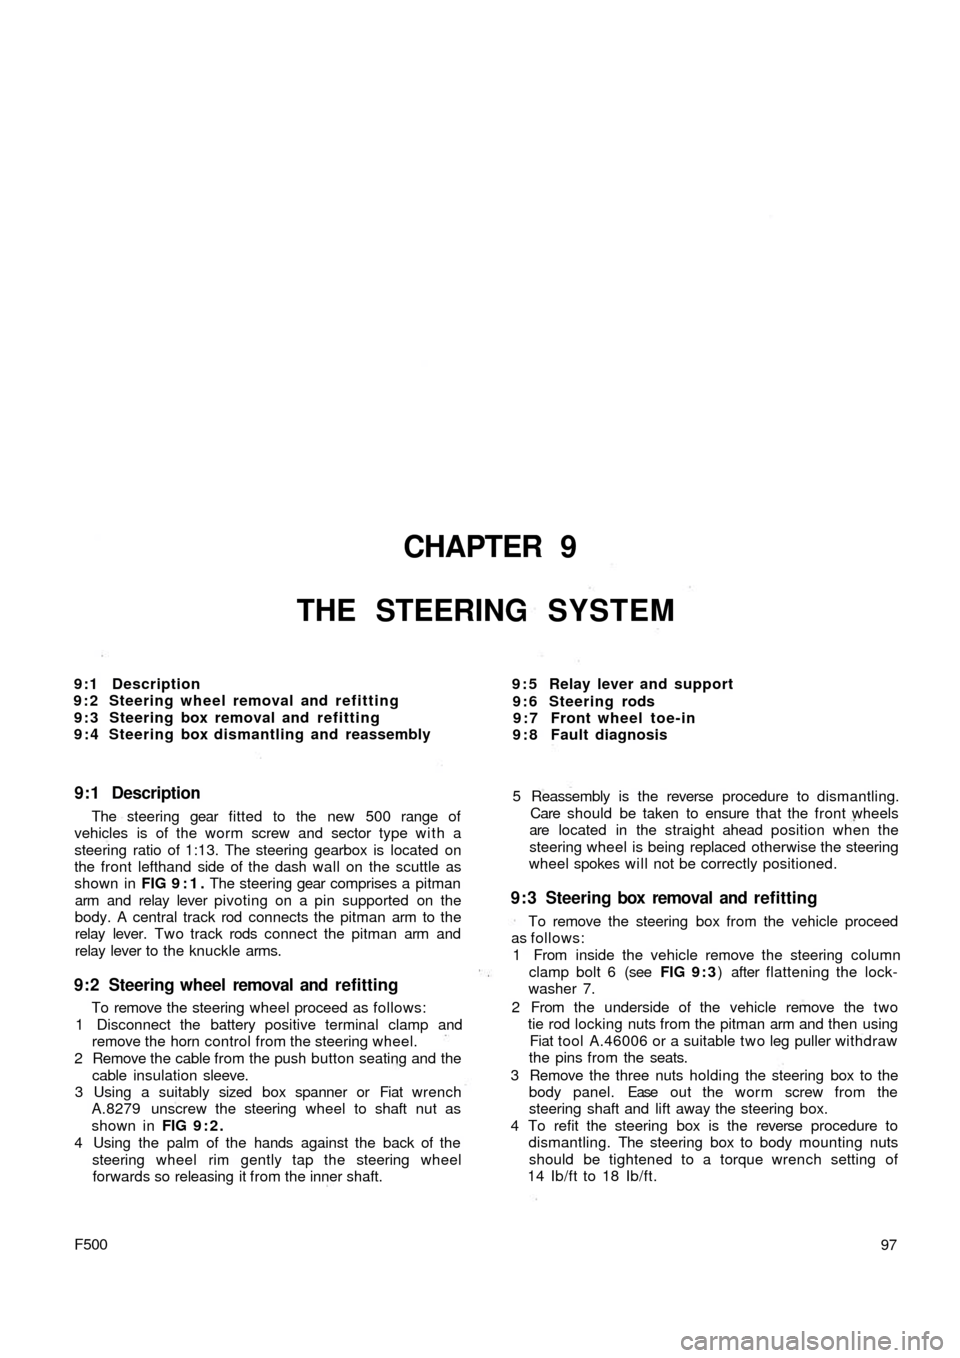 FIAT 500 1957 1.G Workshop Manual CHAPTER 9
THE STEERING SYSTEM
9 : 5 Relay lever and support
9 : 6 Steering rods
9 : 7 Front wheel toe-in
9 : 8 Fault diagnosis 9:1 Description
9 : 2 Steering wheel removal and refitting
9 : 3 Steering